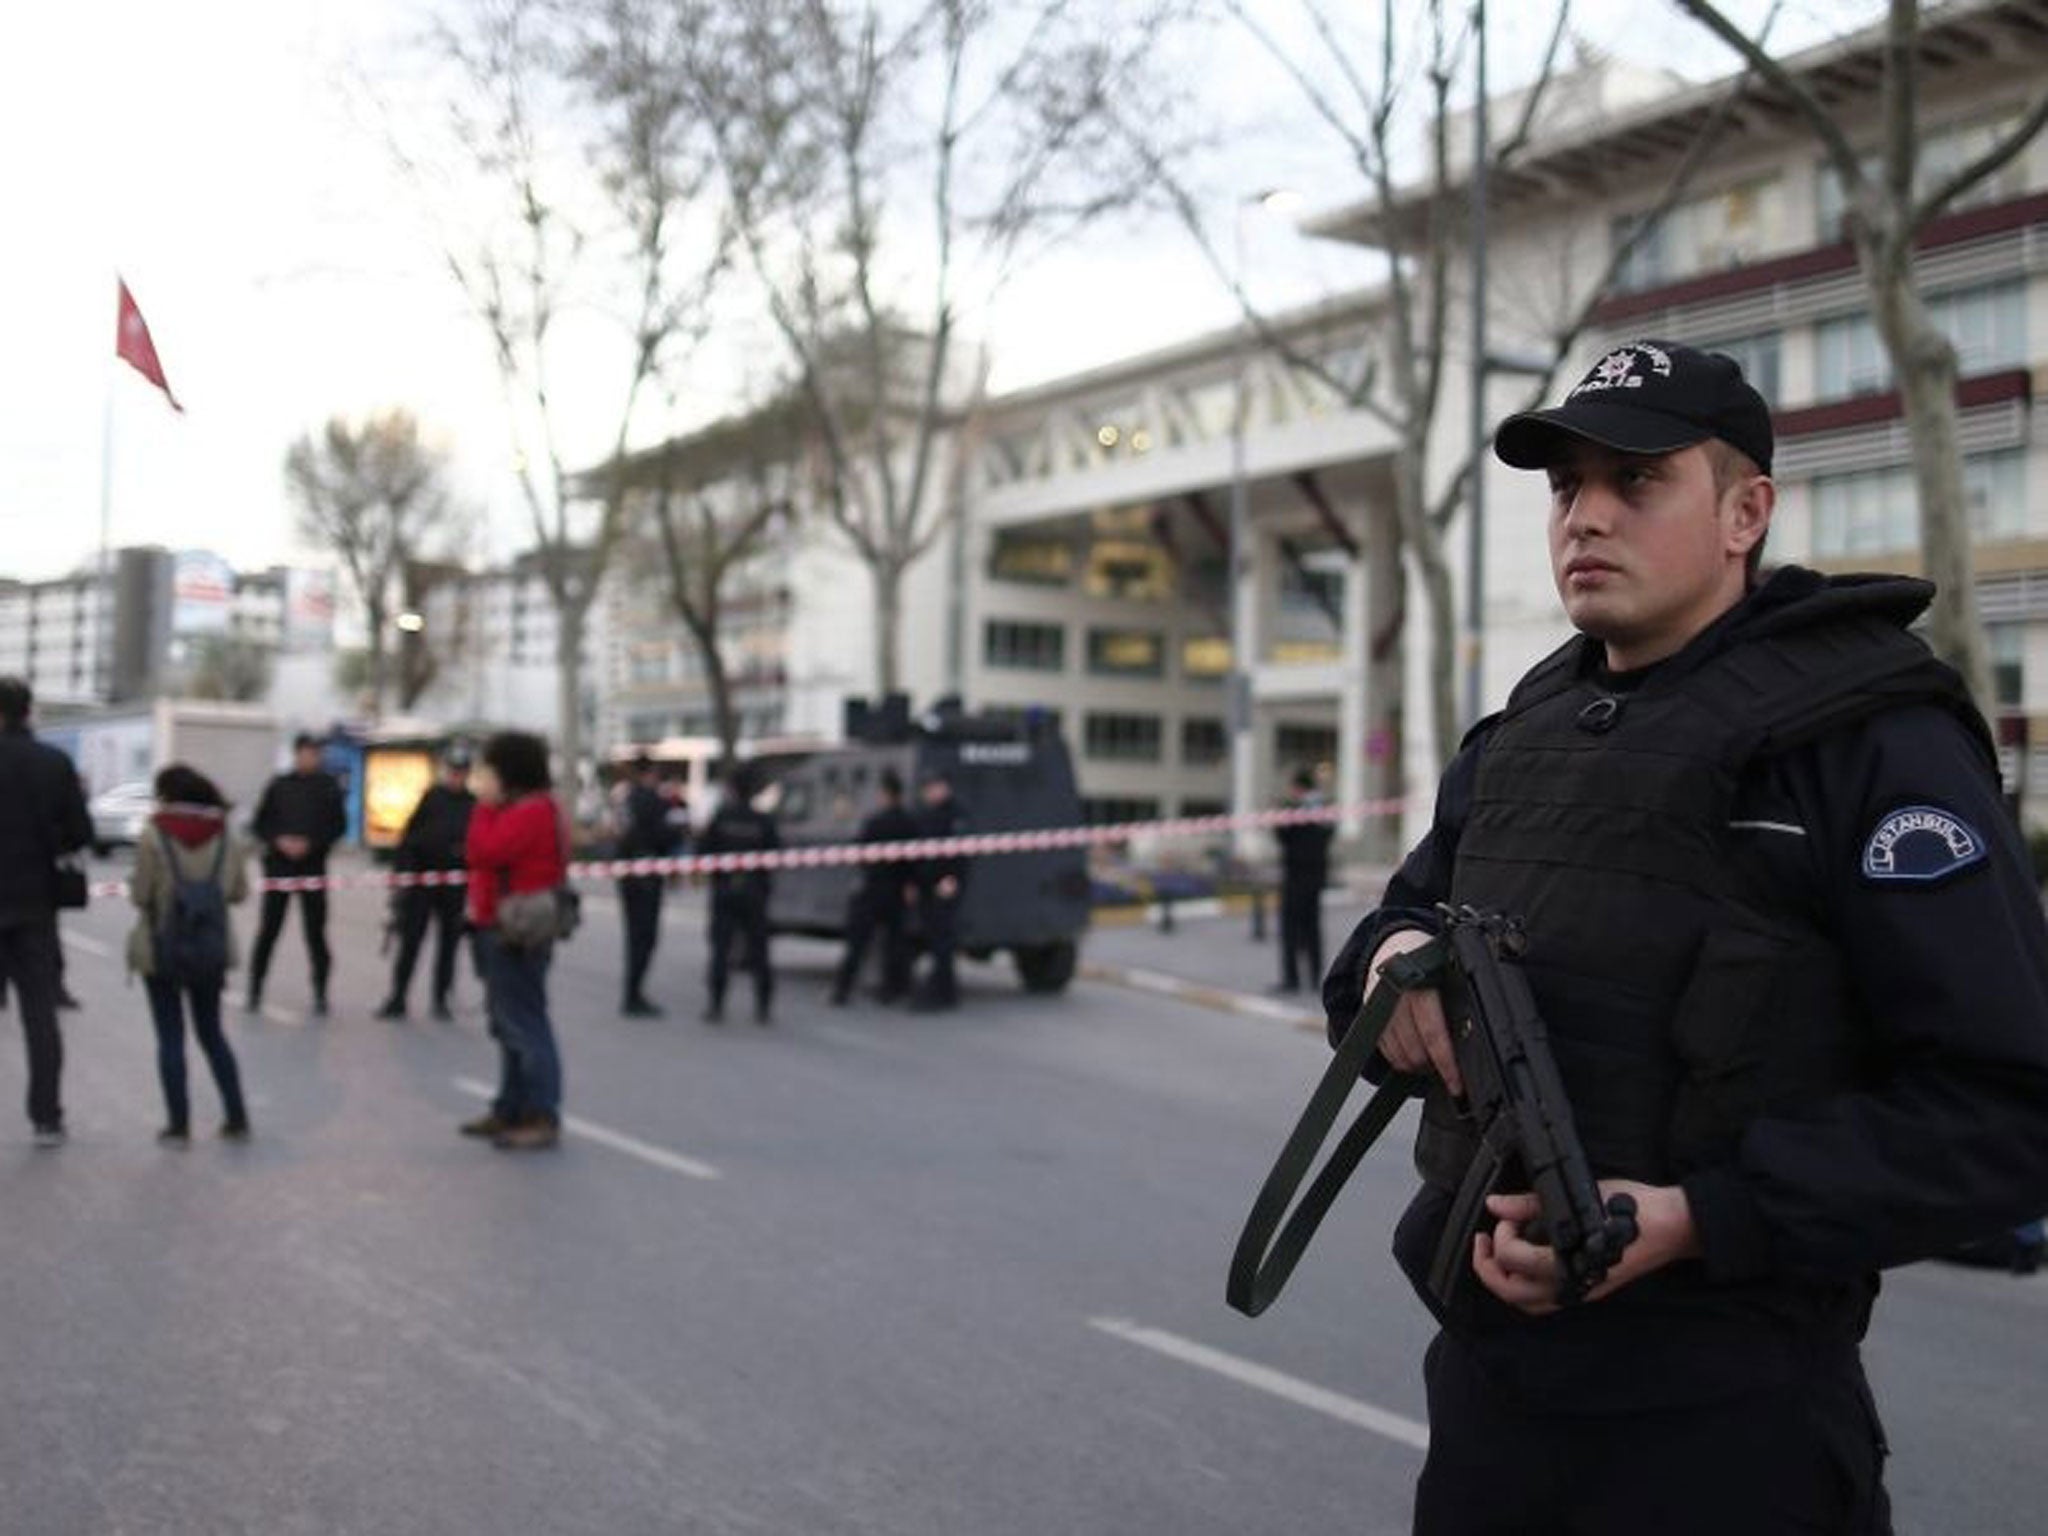 Turkish policemen secure the area in front of the Istanbul Police Headquarter after an attack by an armed woman and man, in Istanbul.